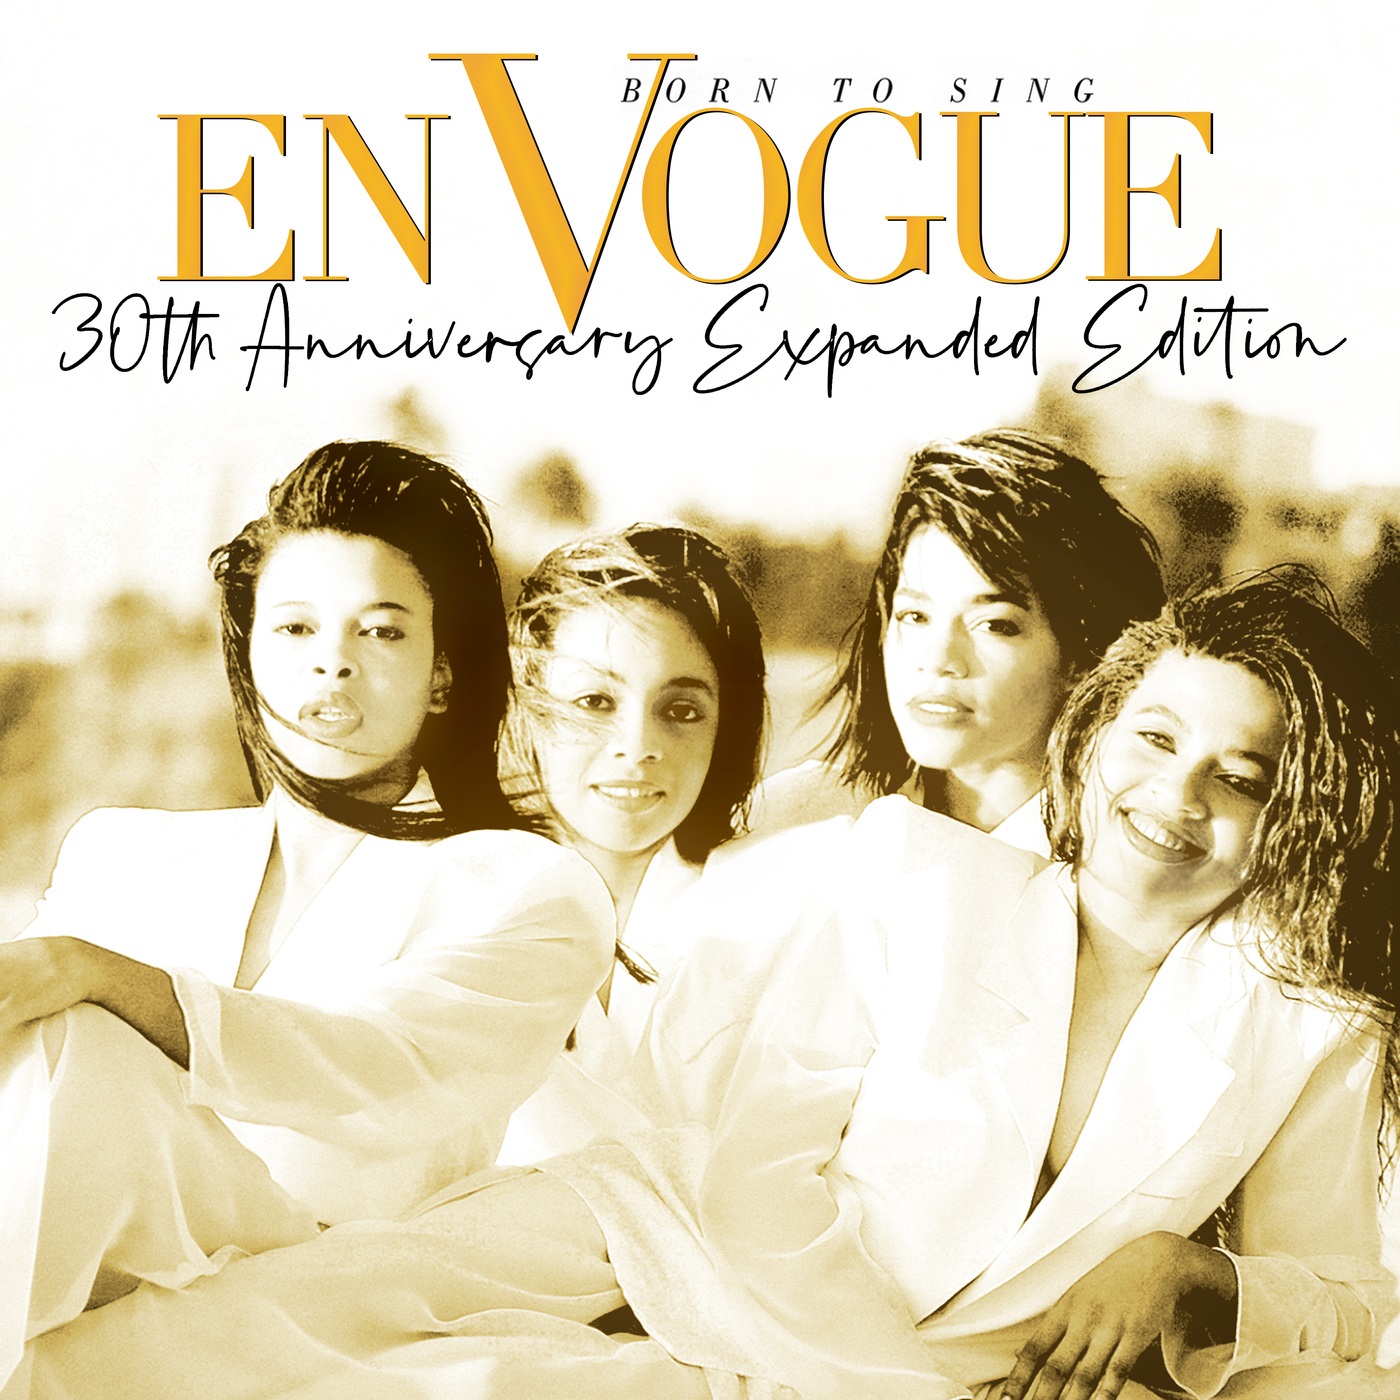 En Vogue – Born To Sing (30th Anniversary Expanded Edition) (1990/2020) [FLAC 24bit/96kHz]